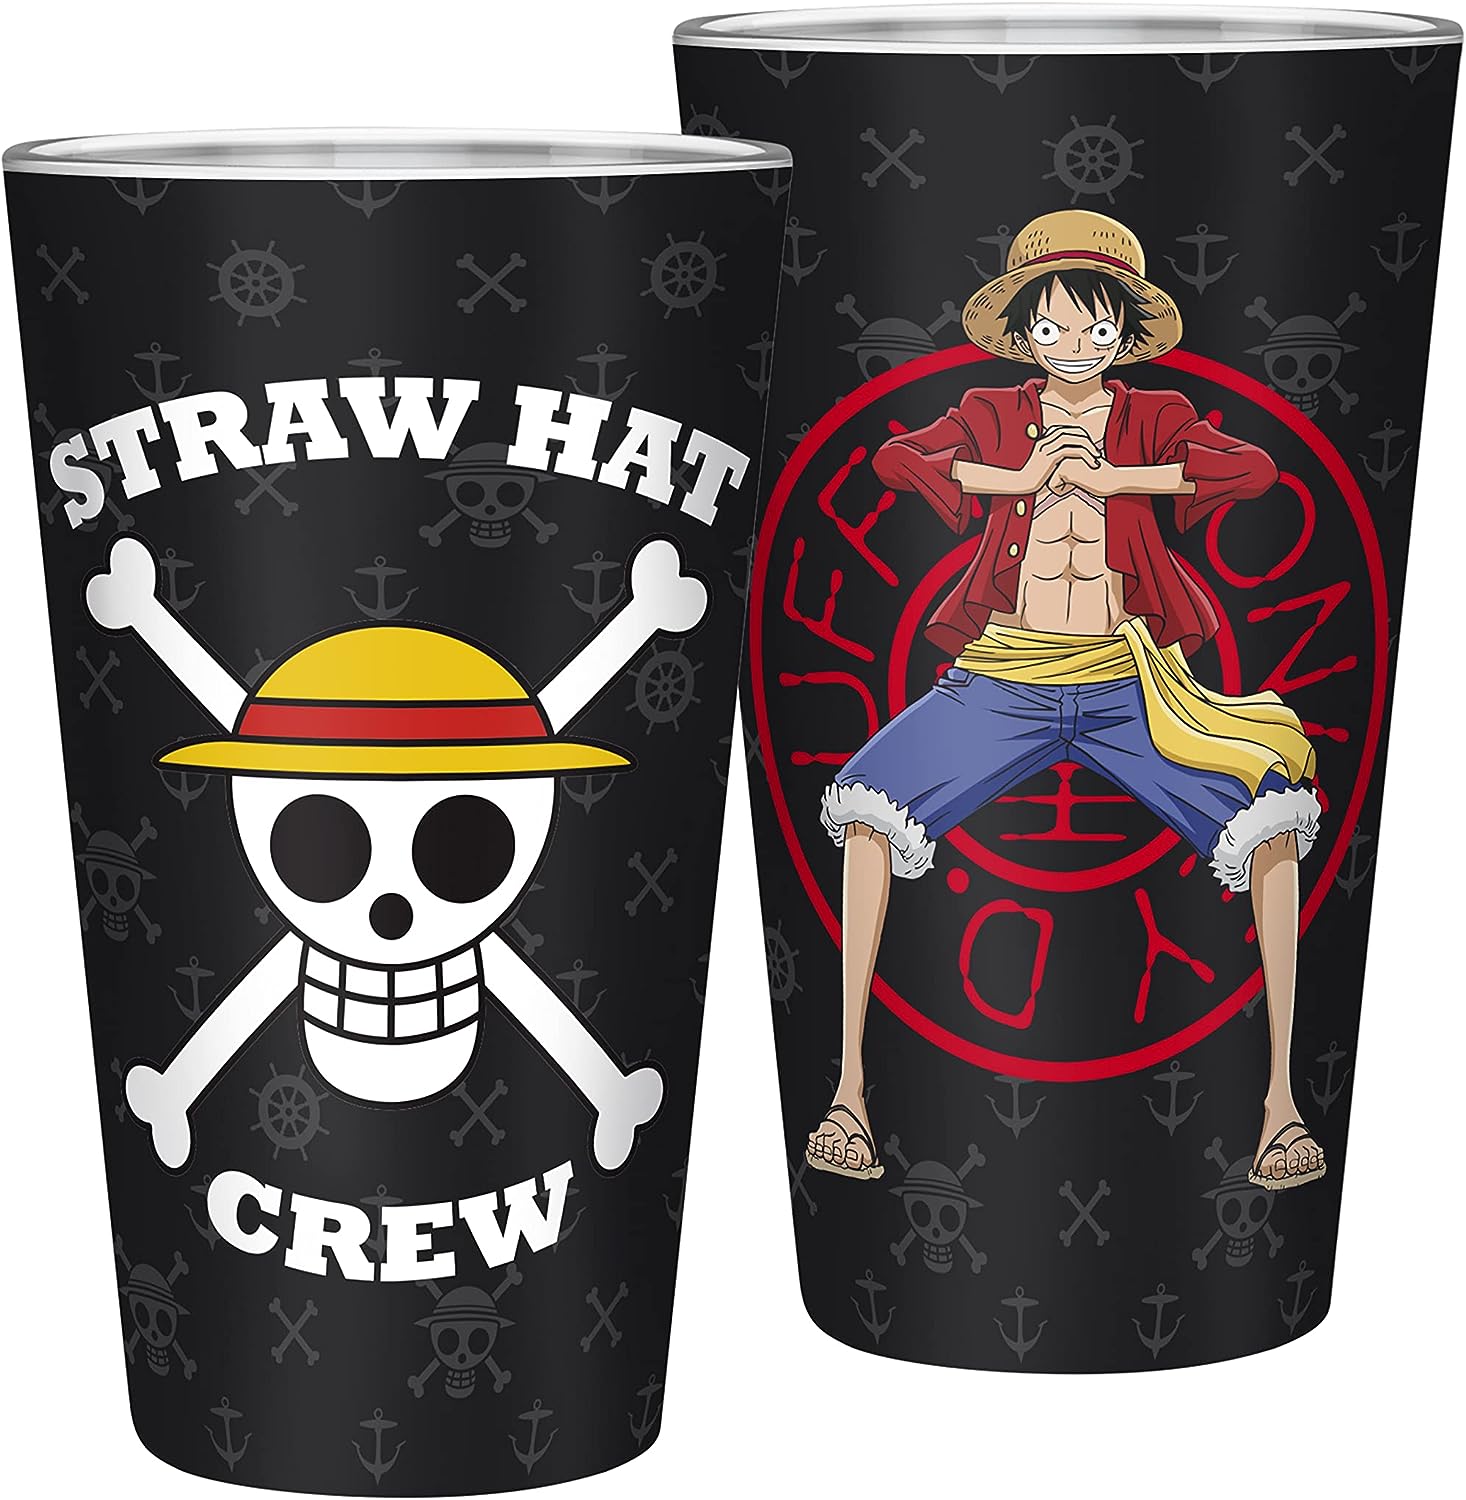 One Piece Straw Hat Jolly Roger Crew Mug Notepad Pin Gift Set - Abysse - 2